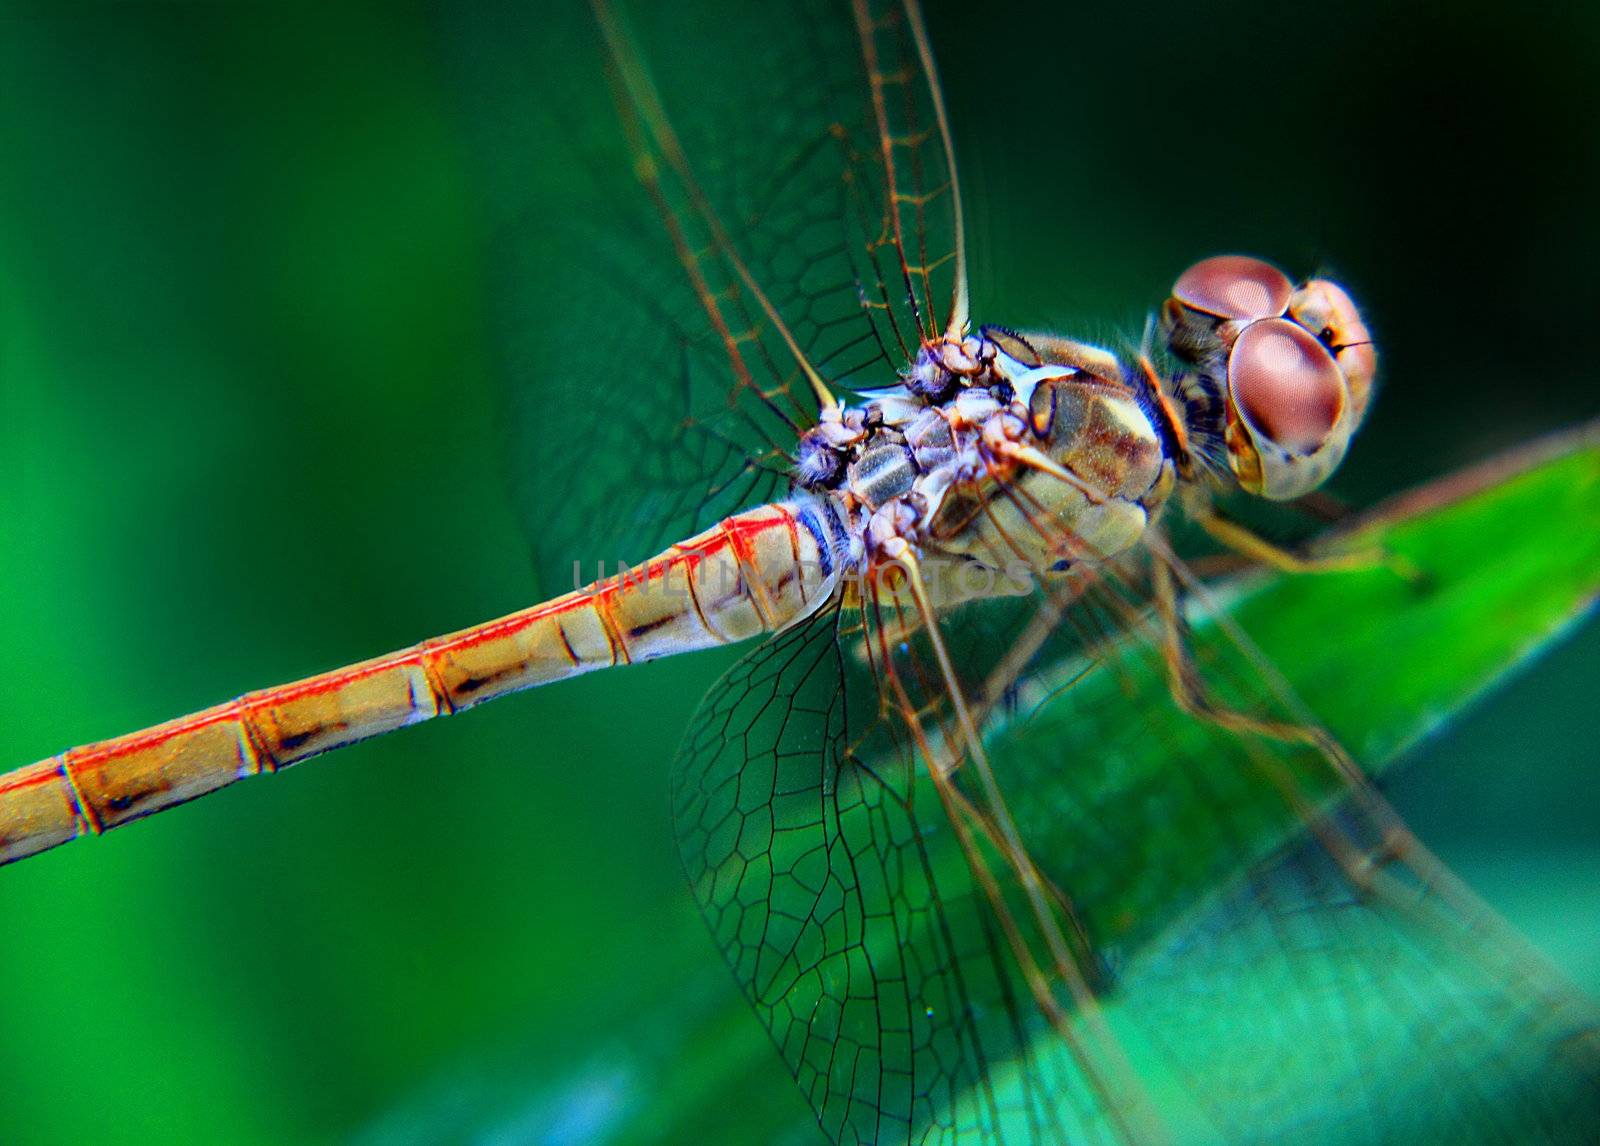 Dragonfly by selinsmo